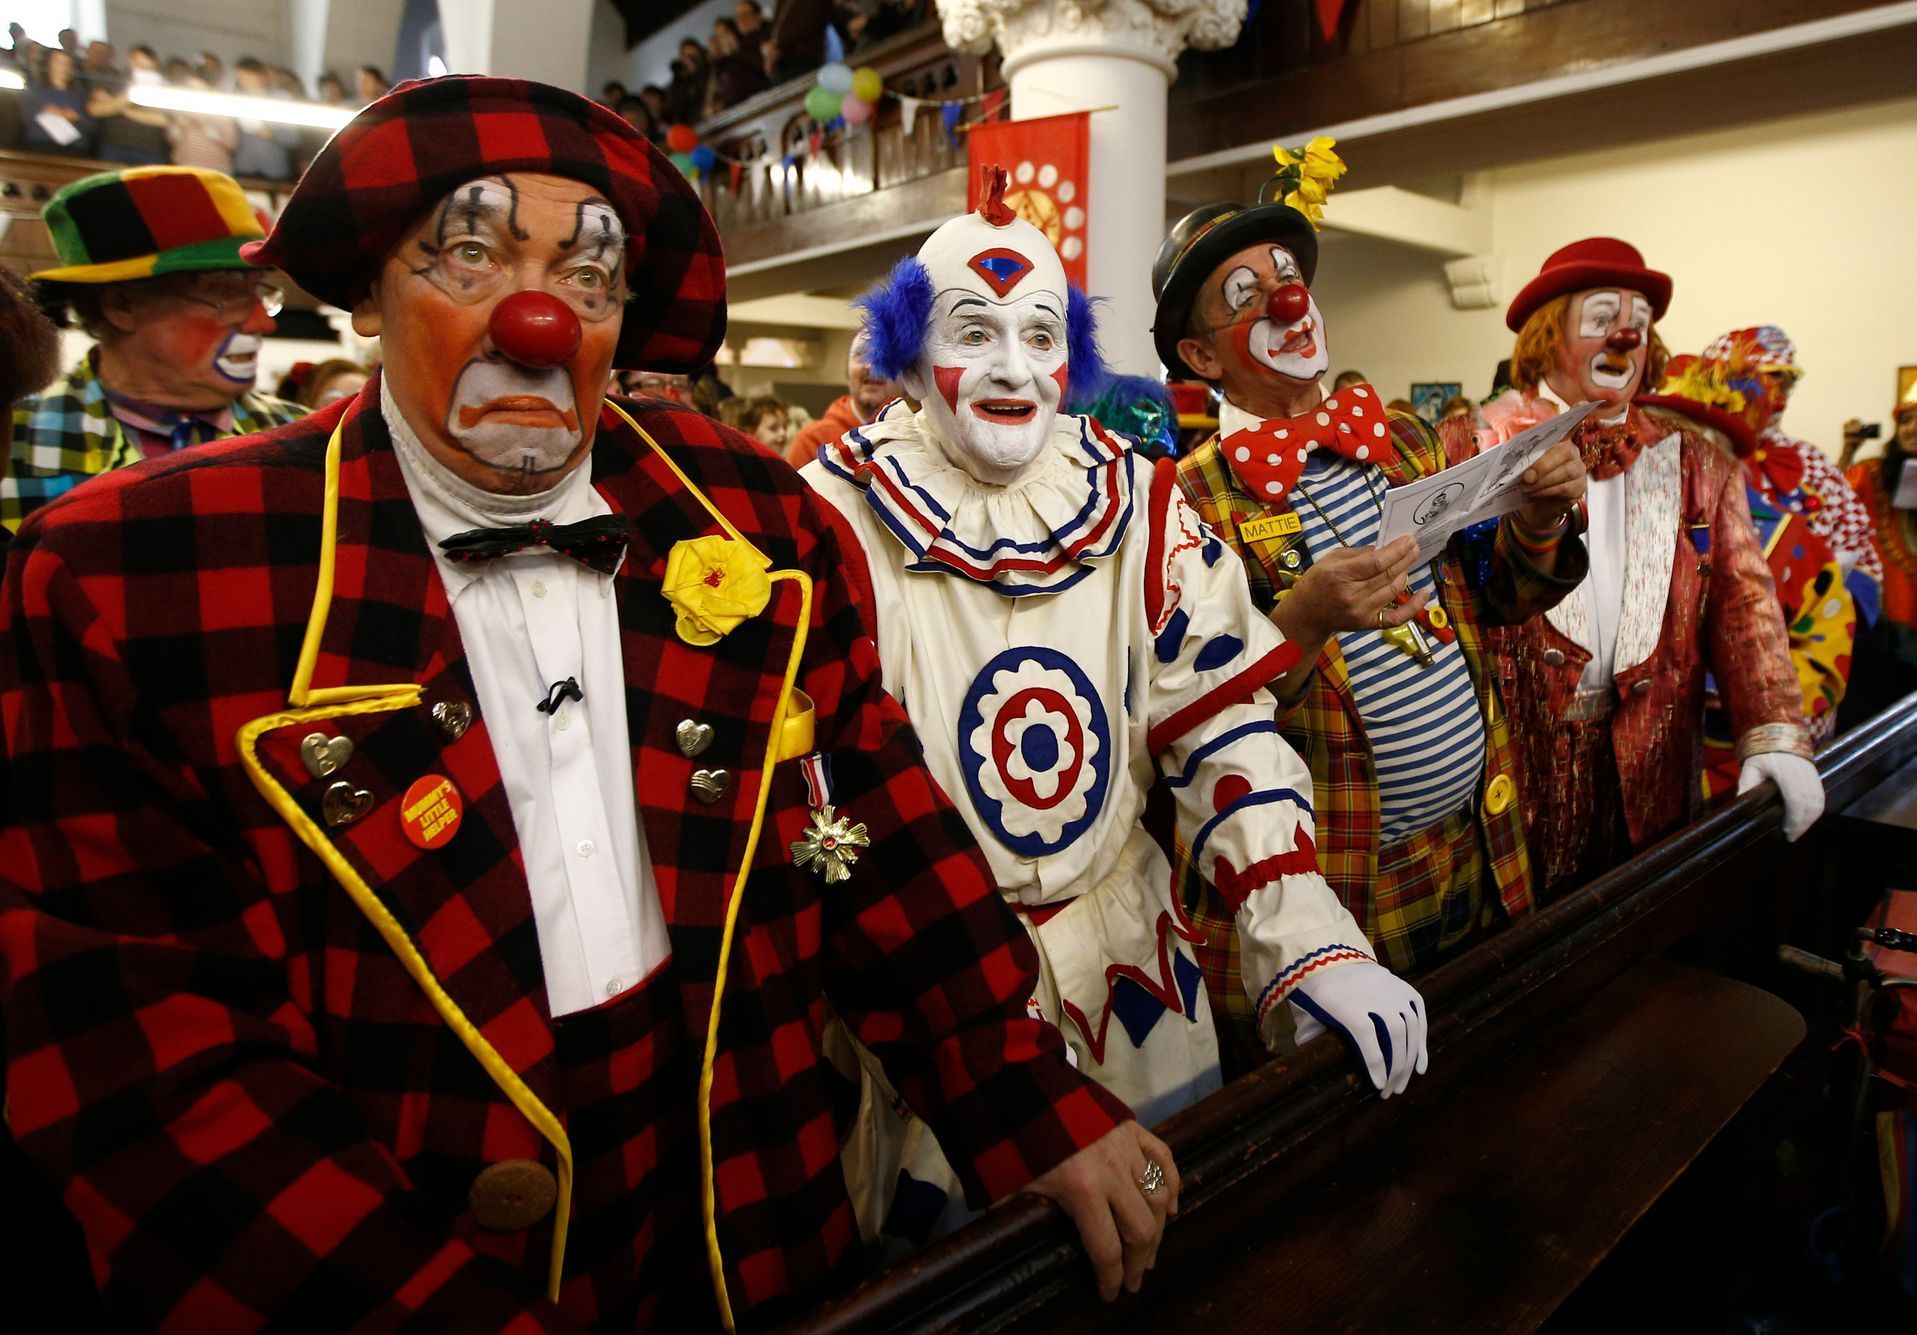 Clowns stand at the pews of the All Saints Church during the Grimaldi clown service in Dalston, north London